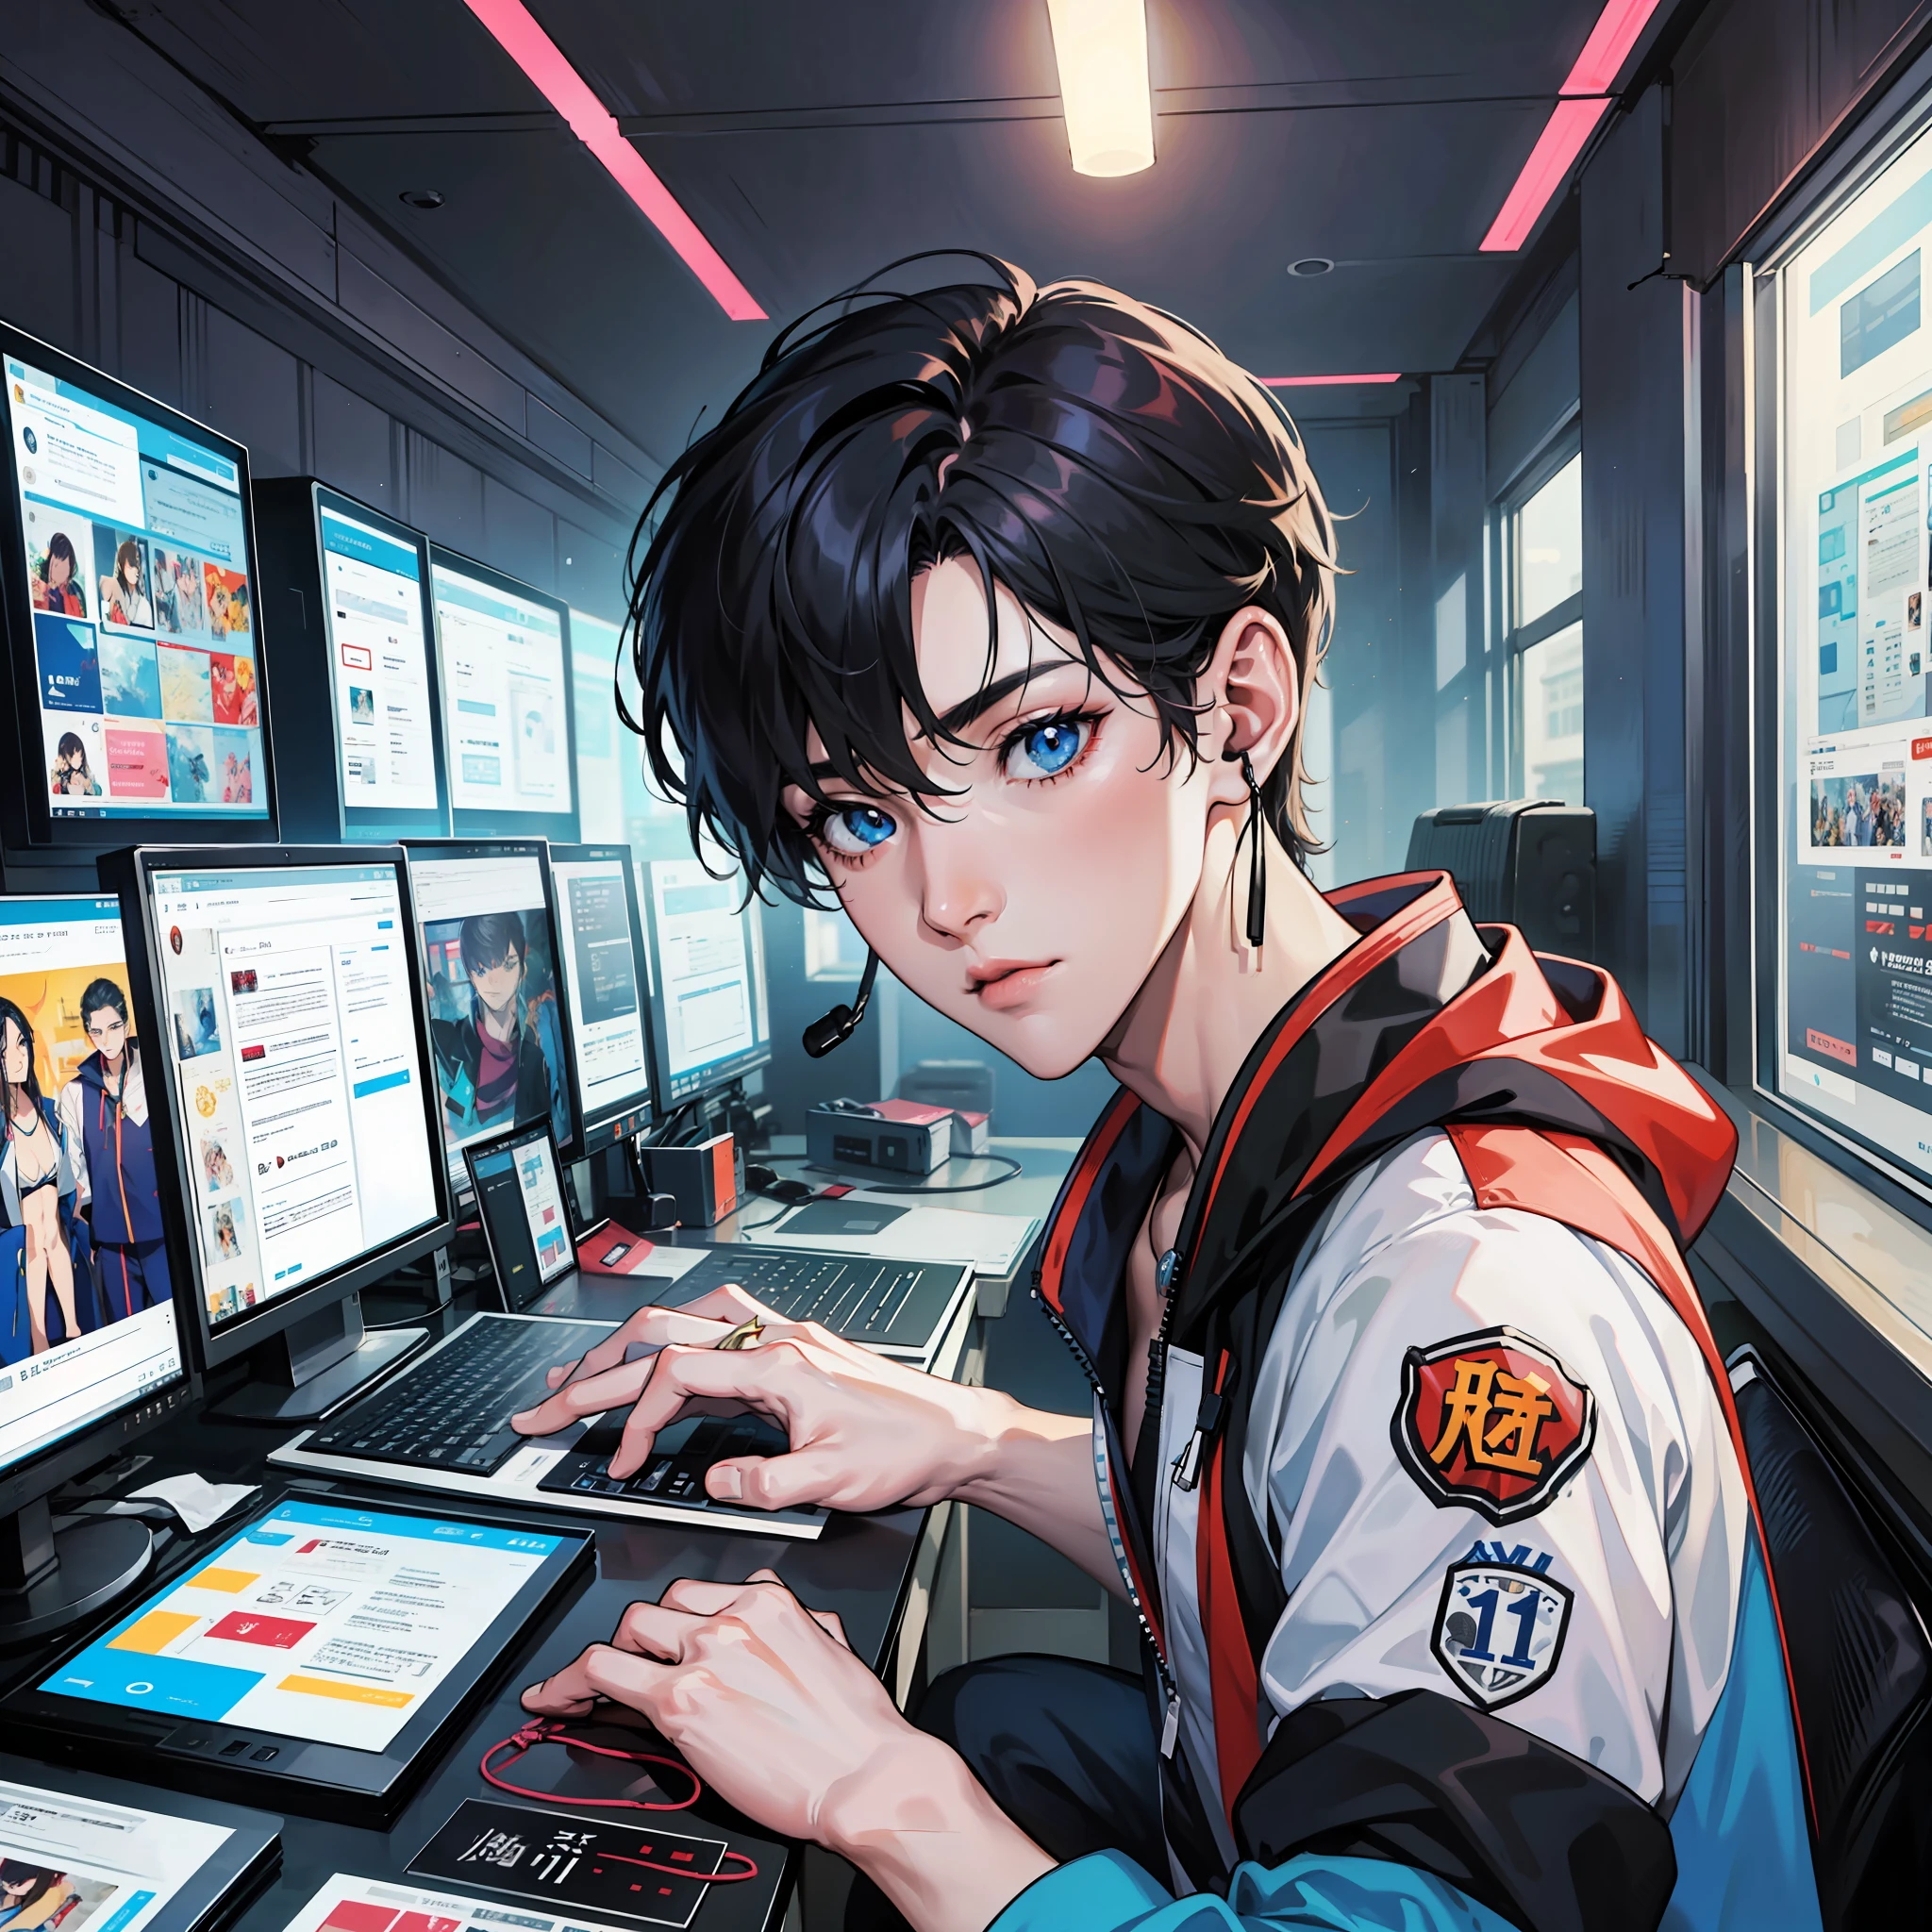 Anime boy calls to talk, ig studios anime style, nightcore, style of anime4 K, High quality anime art style, Anime boy, young anime man, Anime art style, Digital anime illustration, Anime style. 8K, in an anime style, male anime character, Like，best qualtiy：1.0），（Ultra-high resolution：1.0），Anime boys，with short black hair，blue color eyes，sitting in front of the computer，Speak into the microphone，The background is in the esports room，earphone，The head is close to the microphone,8K，Faraway view